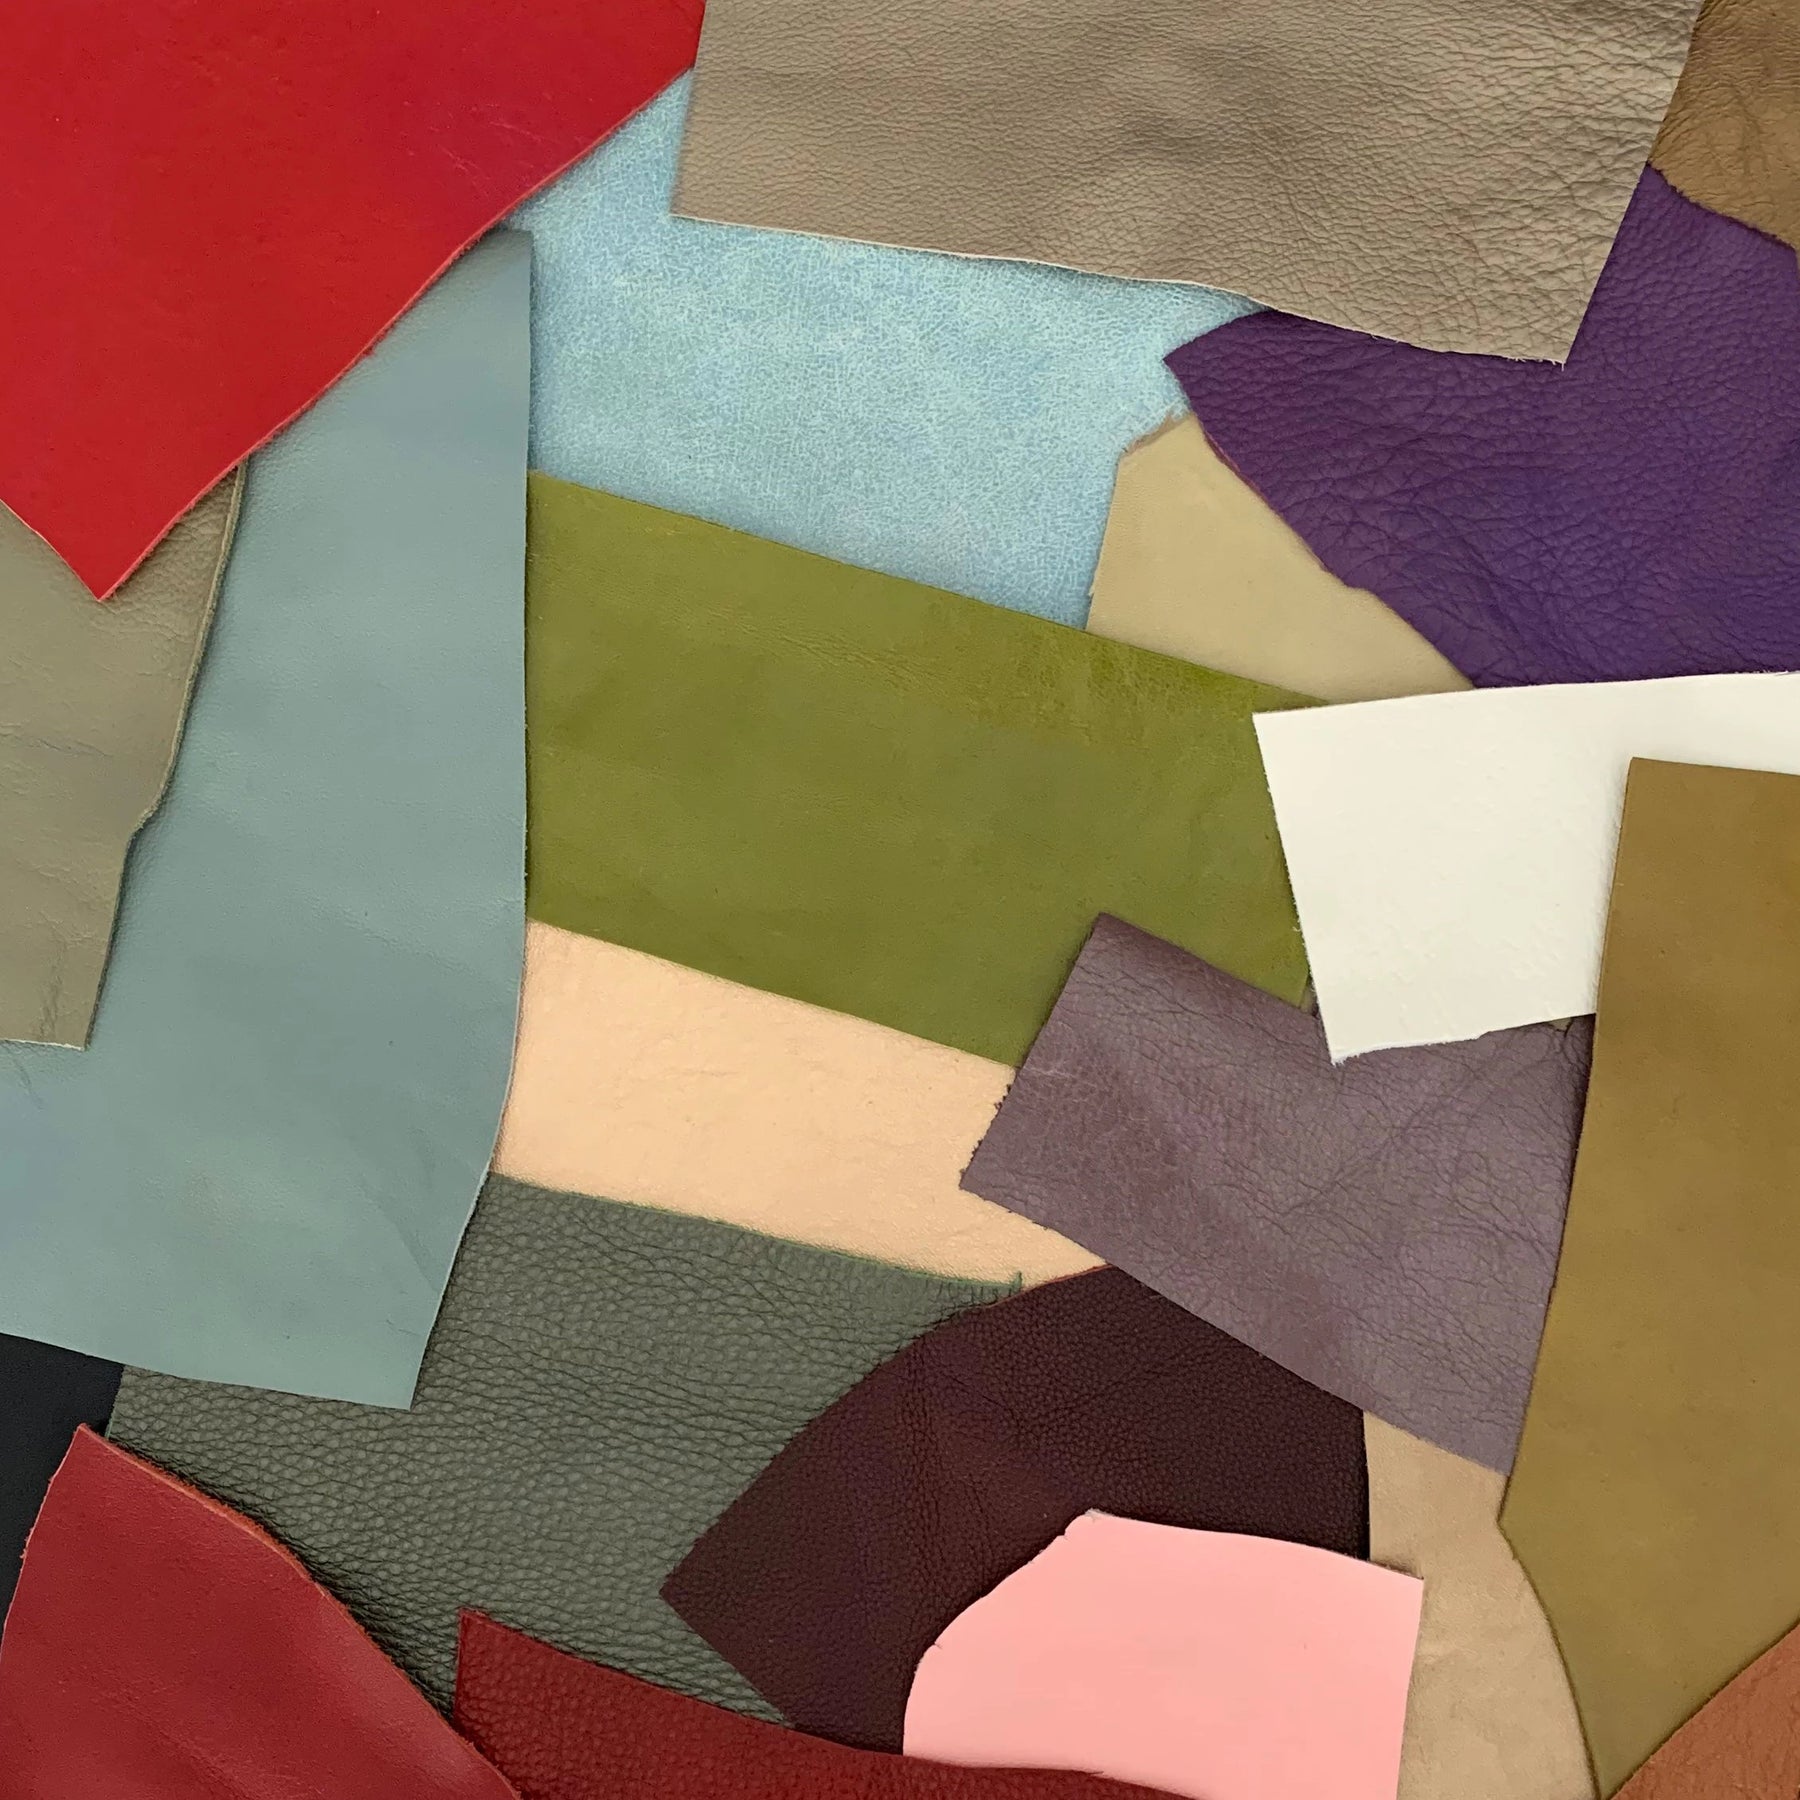 Real Leather Sheets, Genuine Leather Sheets, Leather Scraps For Crafting,  Scrap Leather Pieces, Scrap Leather, Leather Pieces For Crafting